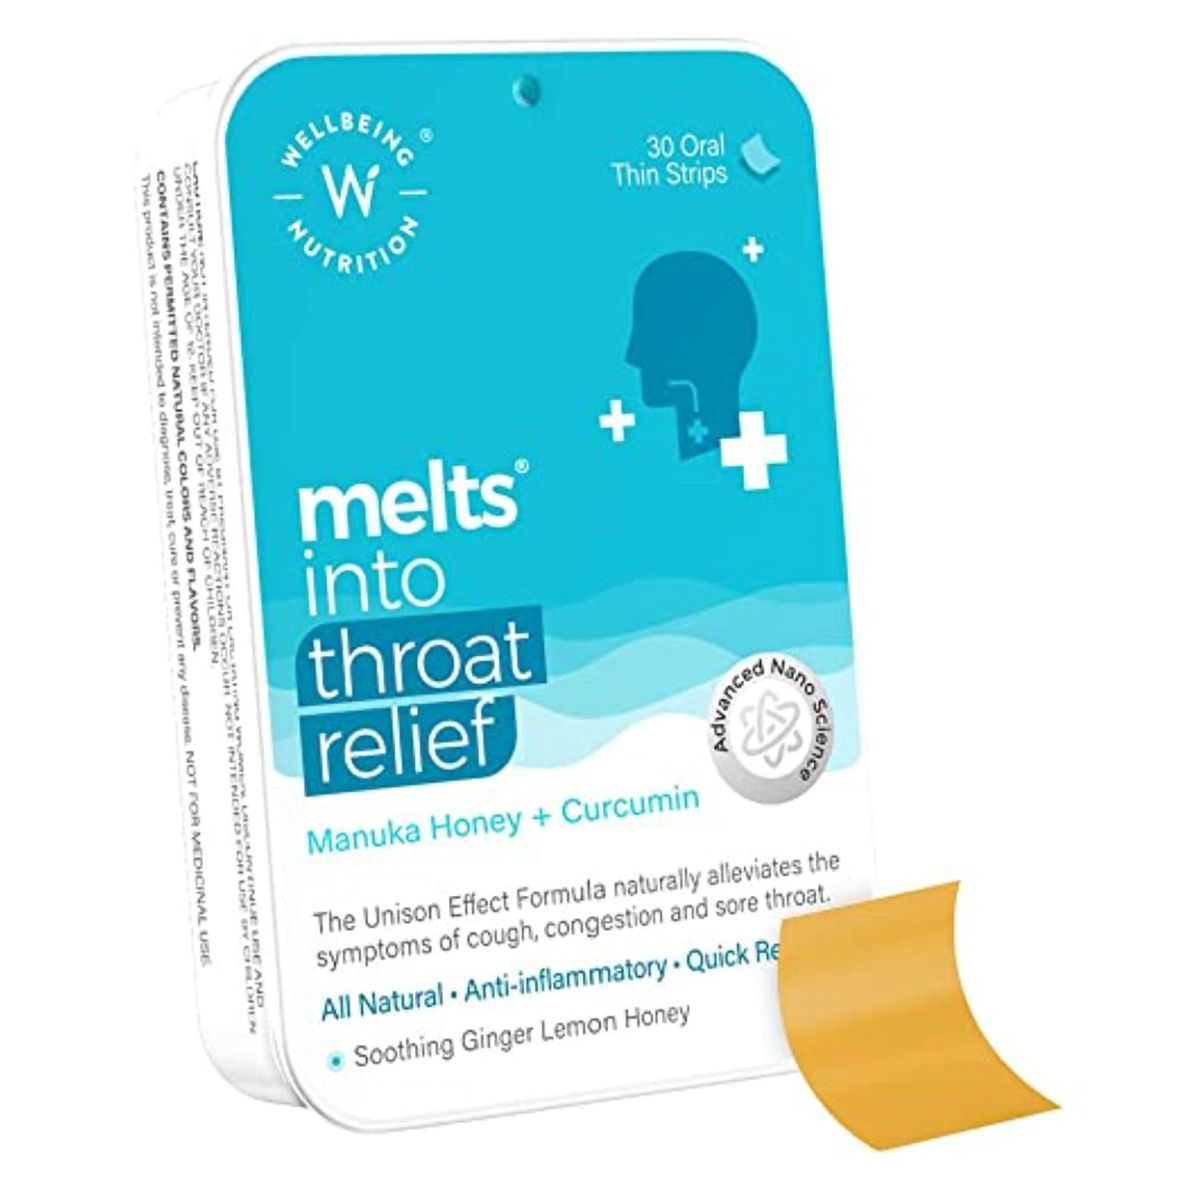 Buy Wellbeing Nutrition Melts Into Throat Relief Manuka Honey + Curcumin, 30 Strips Online